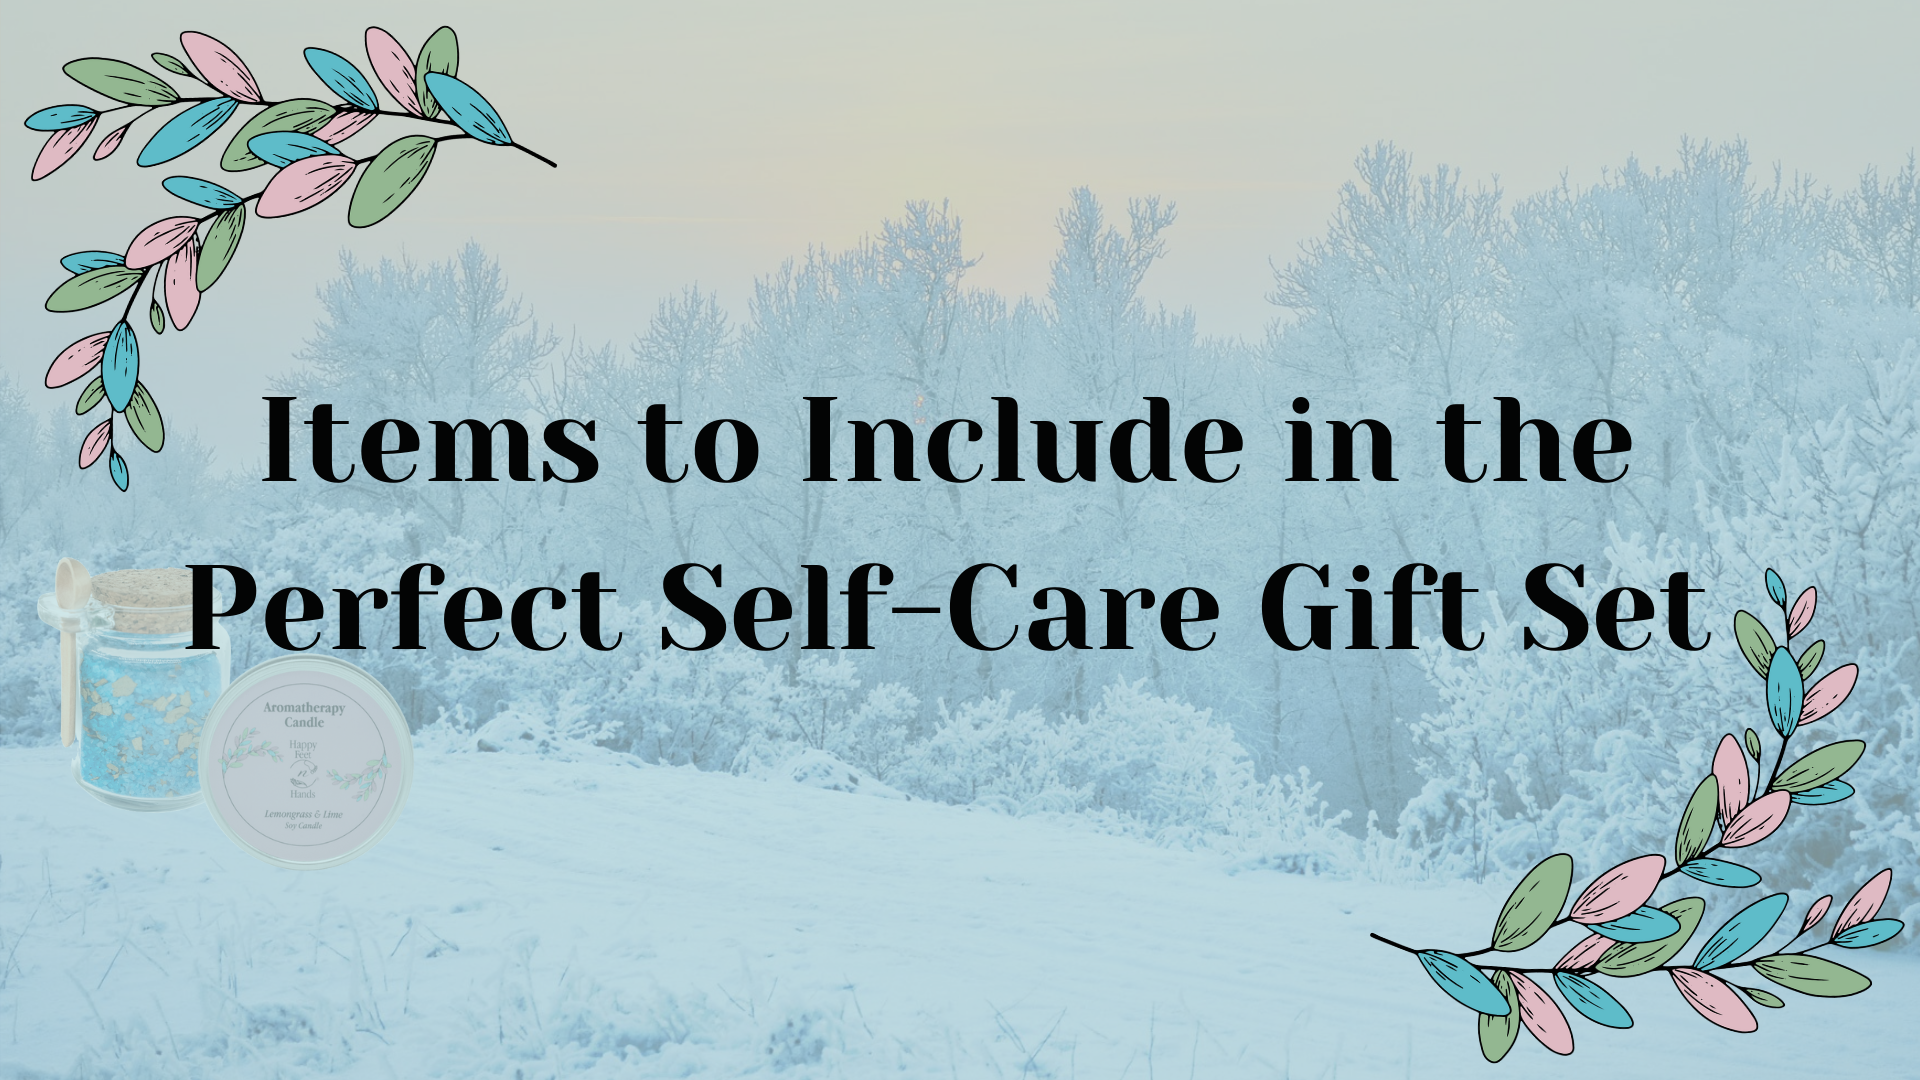 Items to Include in the Perfect Self-Care Gift Set